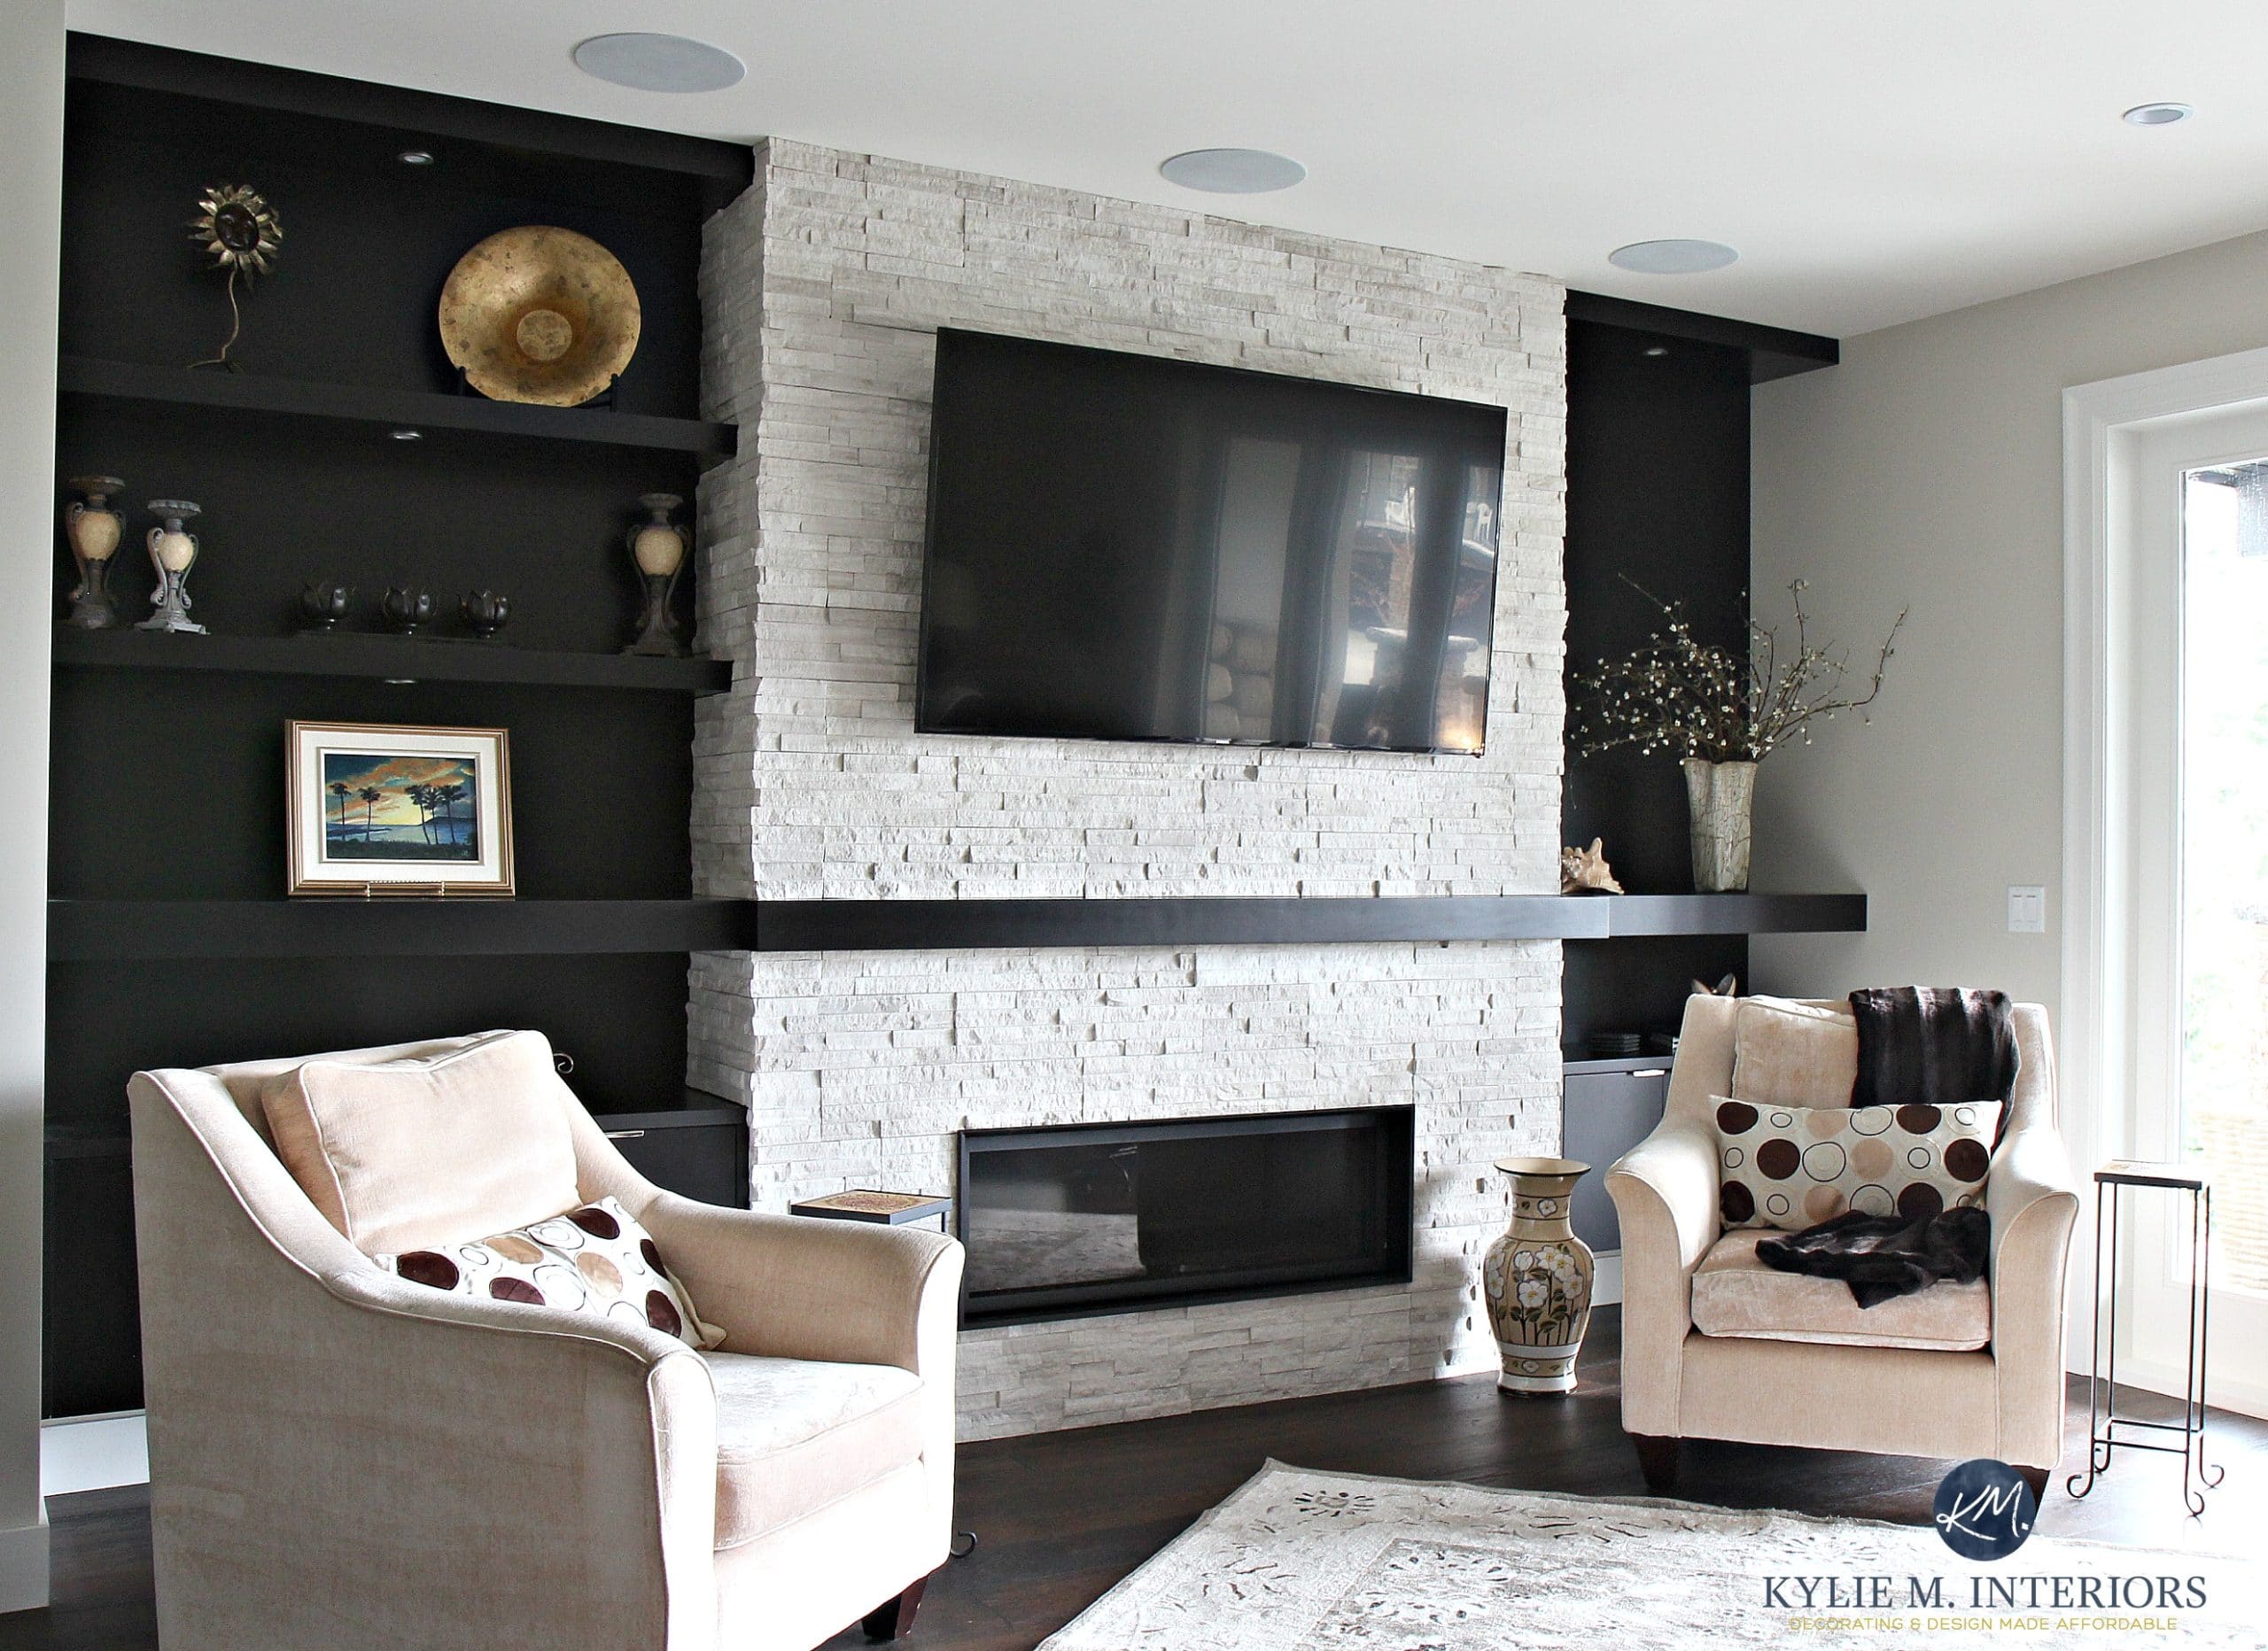 Kylie M Interiors - How To Update Your Fireplace - 5 Easy Update Ideas